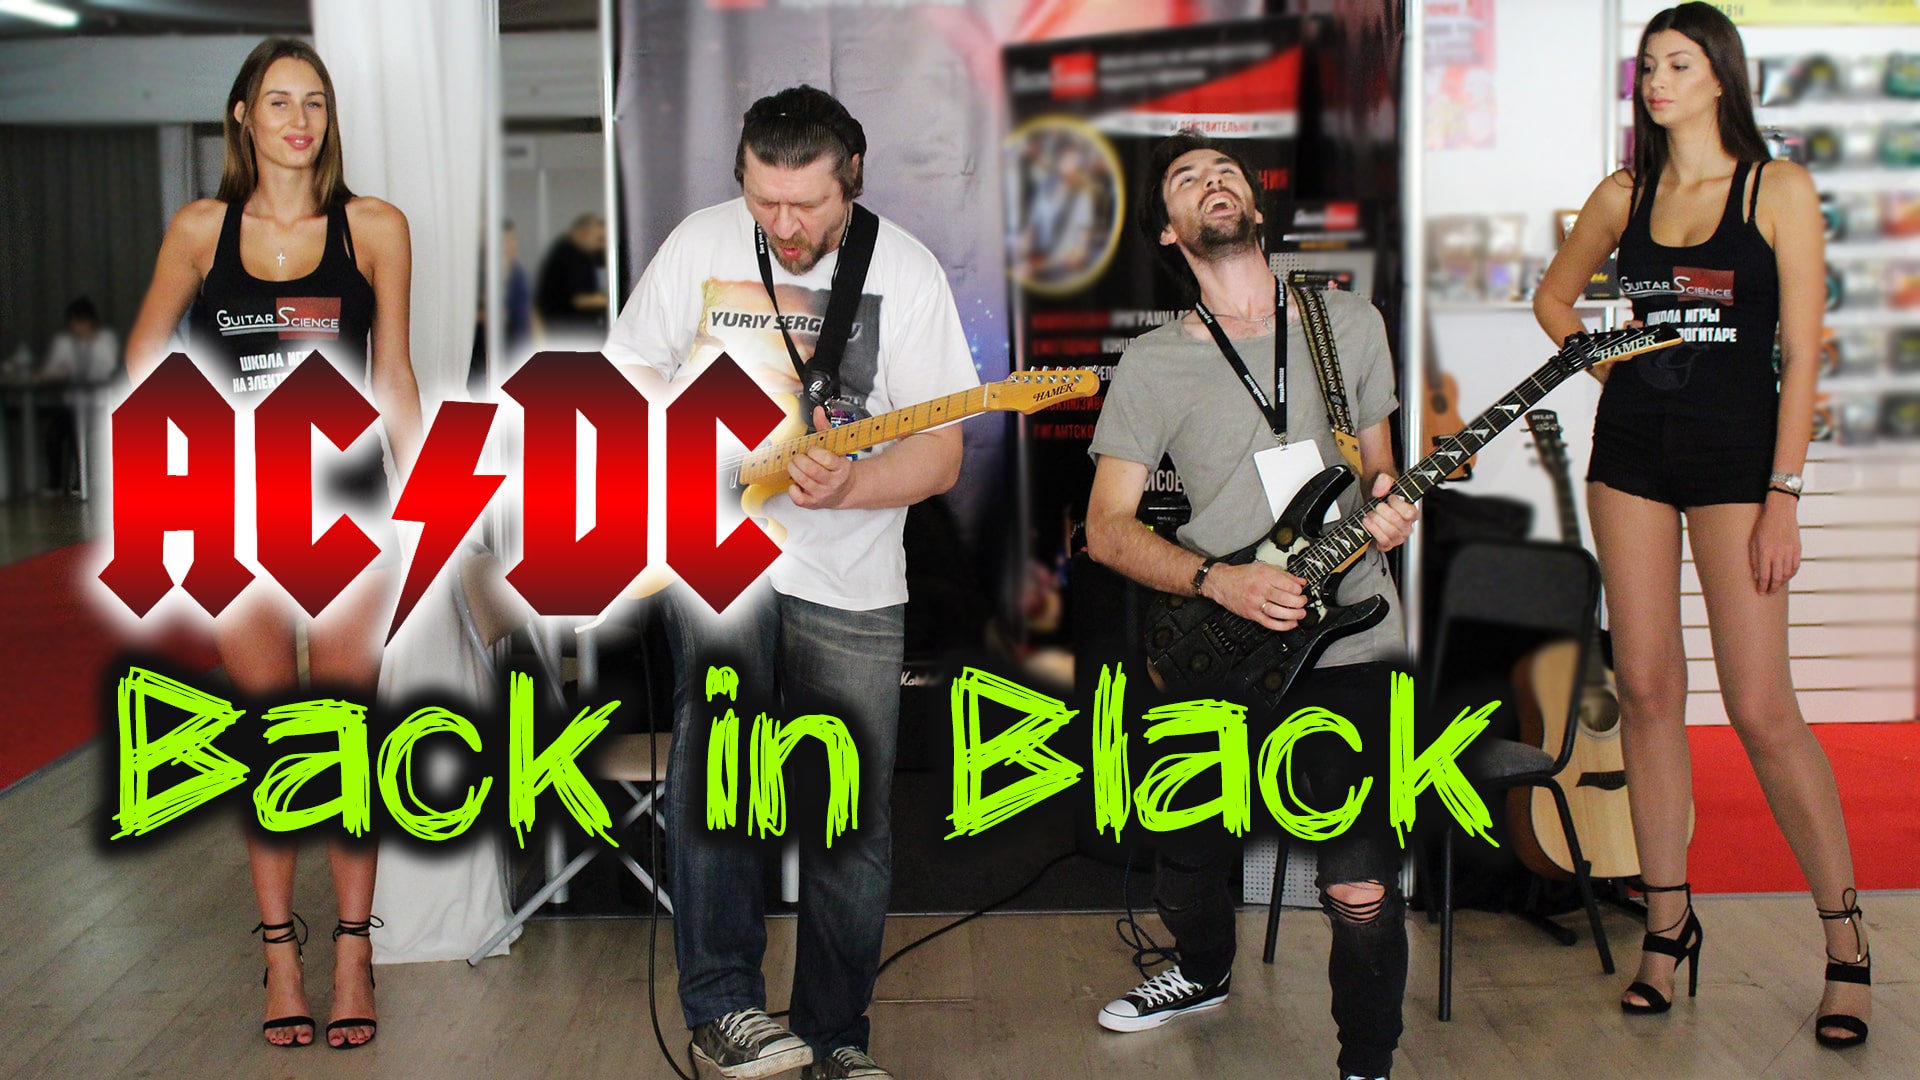 ACDC - Back in Black (Live at NAMM Musikmesse Russia). Kirill Safonov and Yuriy Sergeev